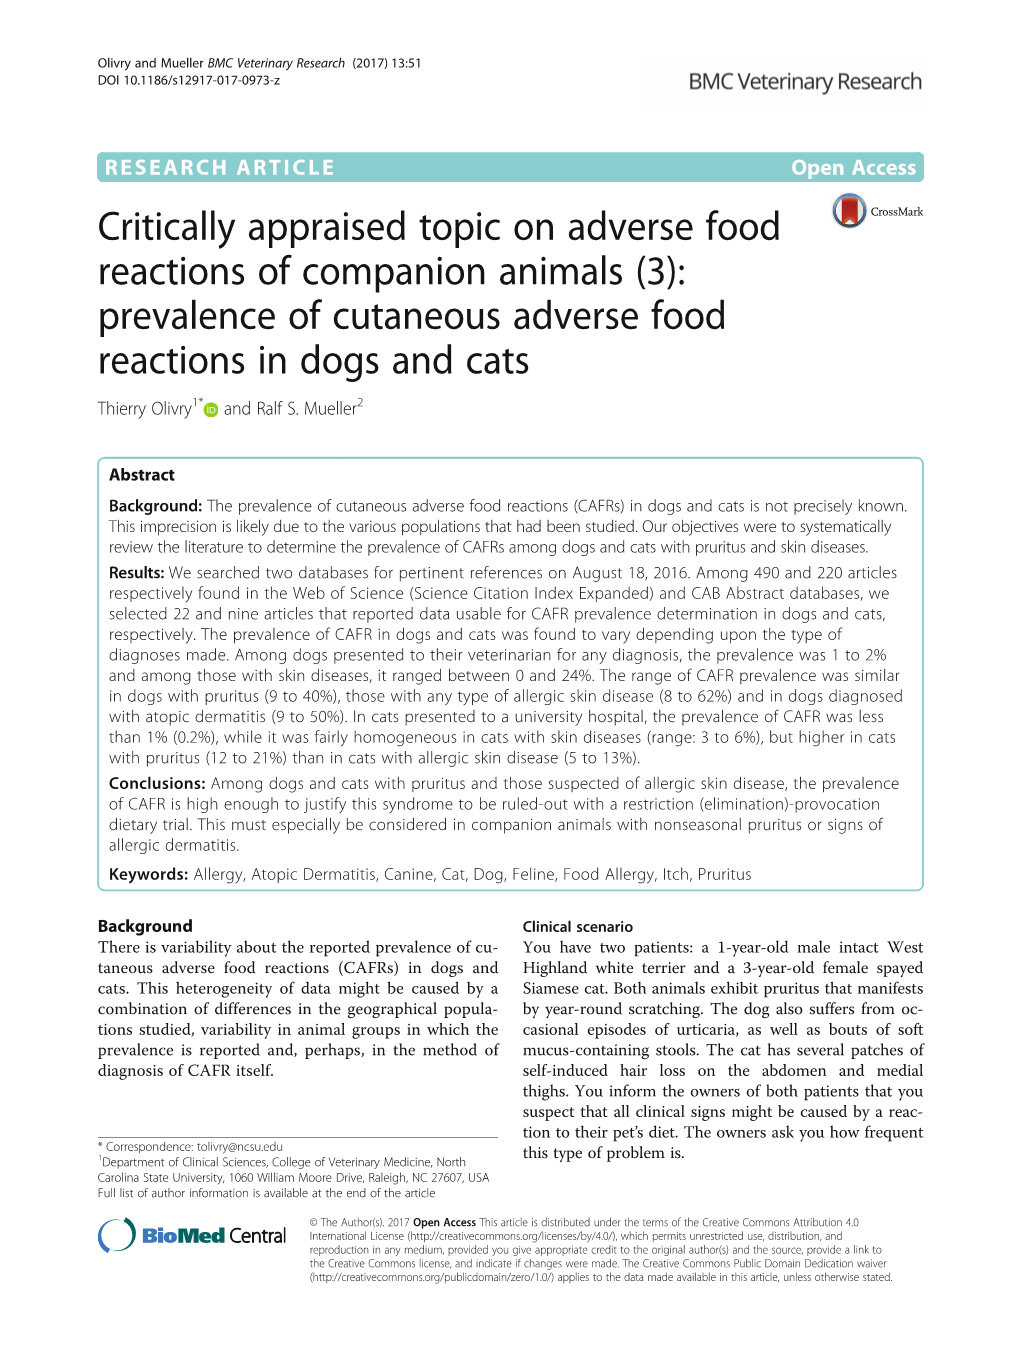 Critically Appraised Topic on Adverse Food